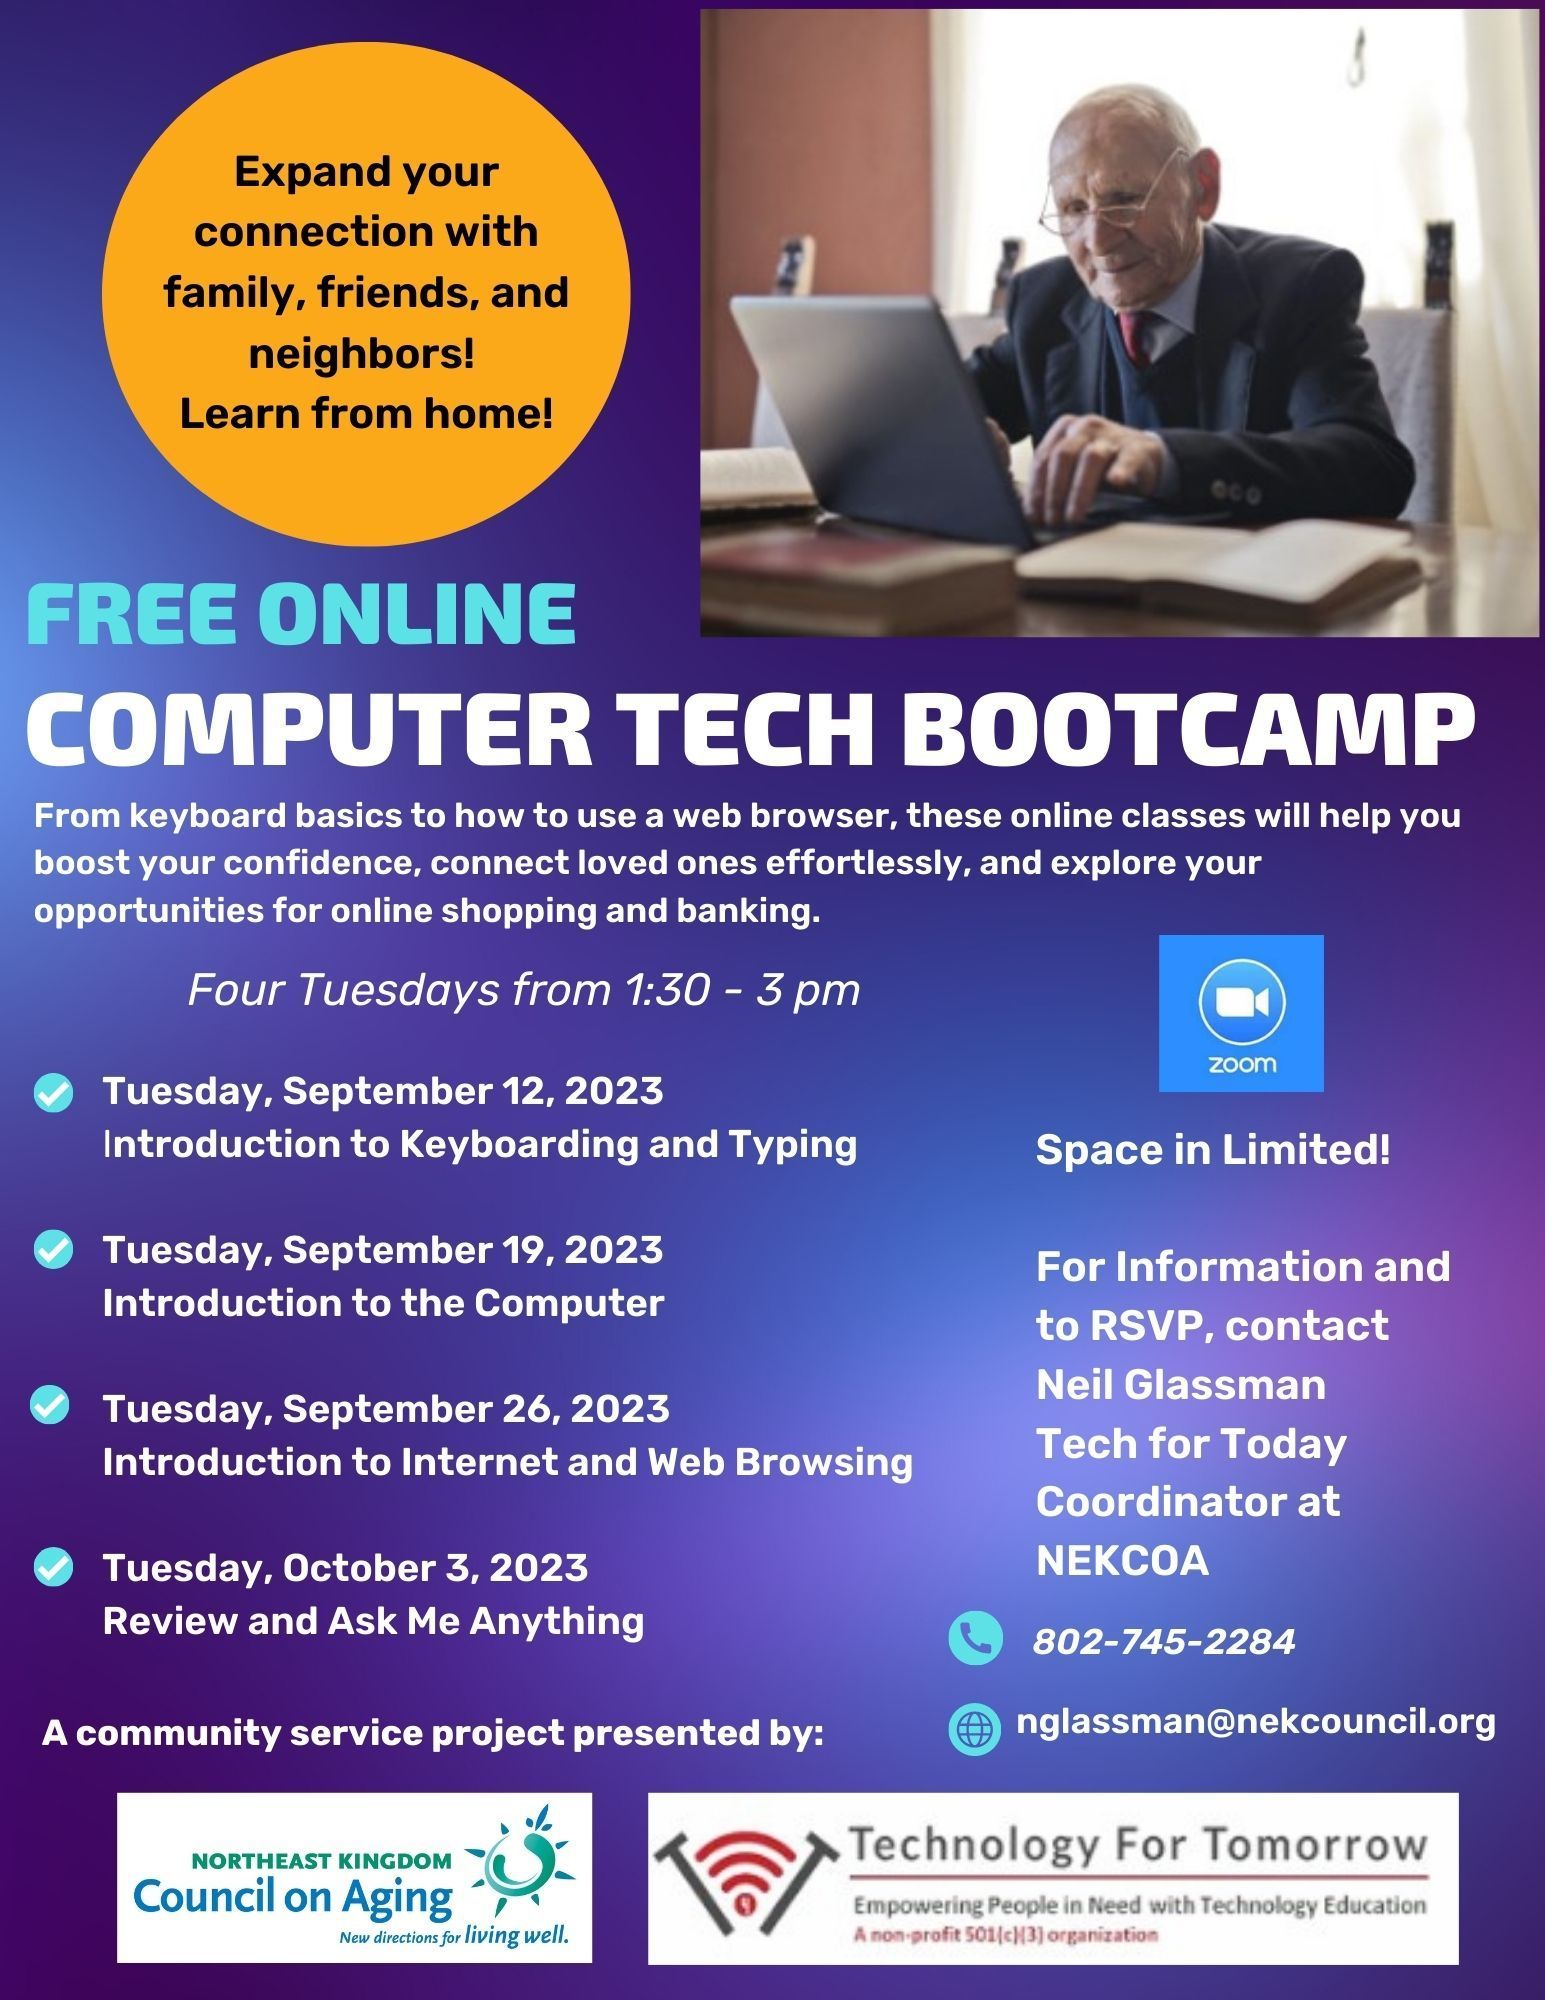 Free Online Computer Classes